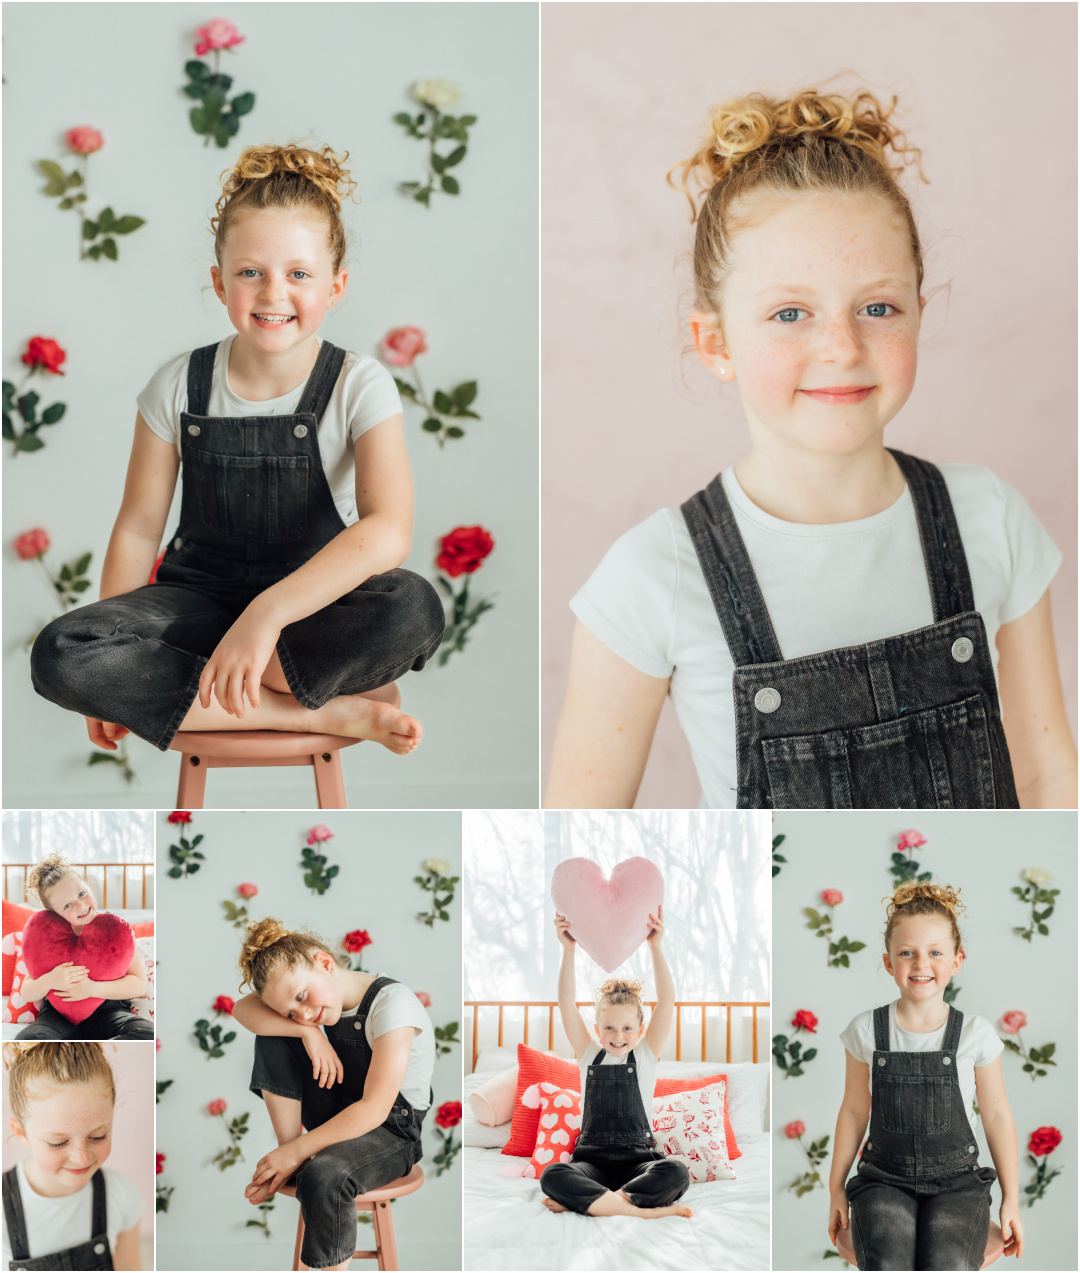 Valentines Day Themed Pictures - Childrens Portrait Photographer